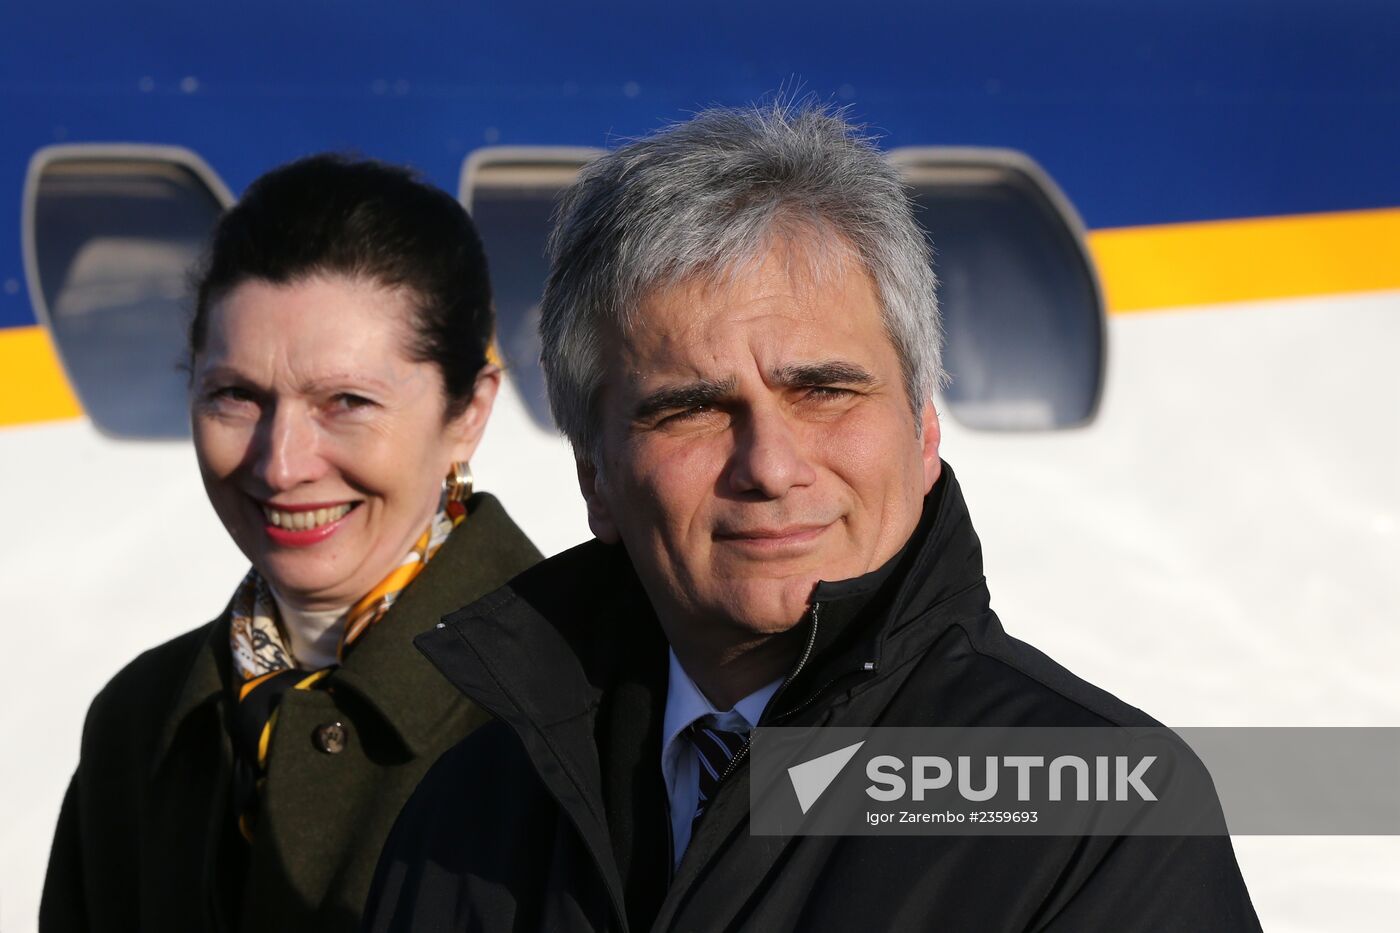 2014 Winter Olympics. Heads of state arrive in Sochi